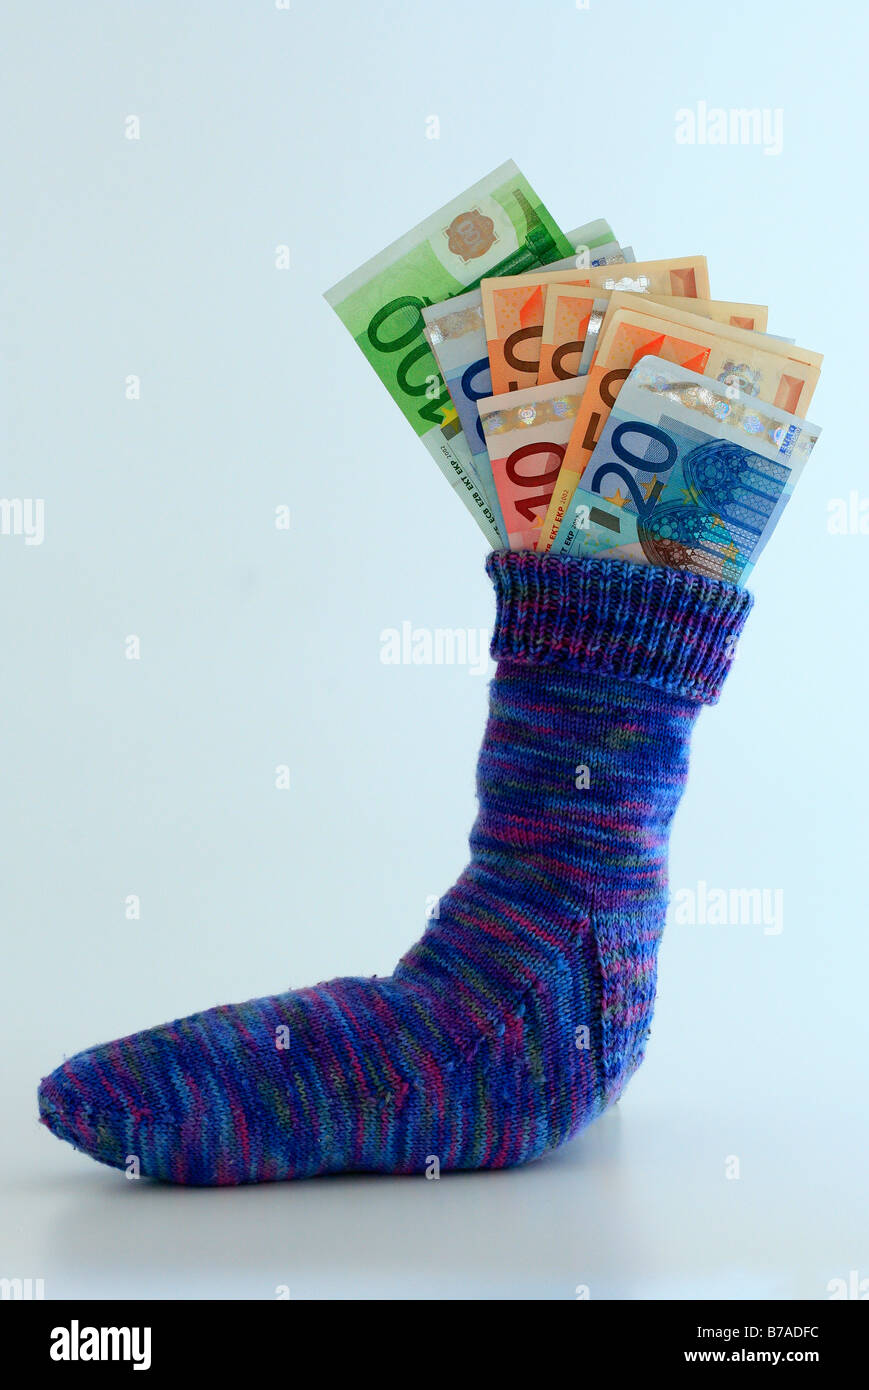 Savings stocking filled with euro notes, alternative to capital investment Stock Photo